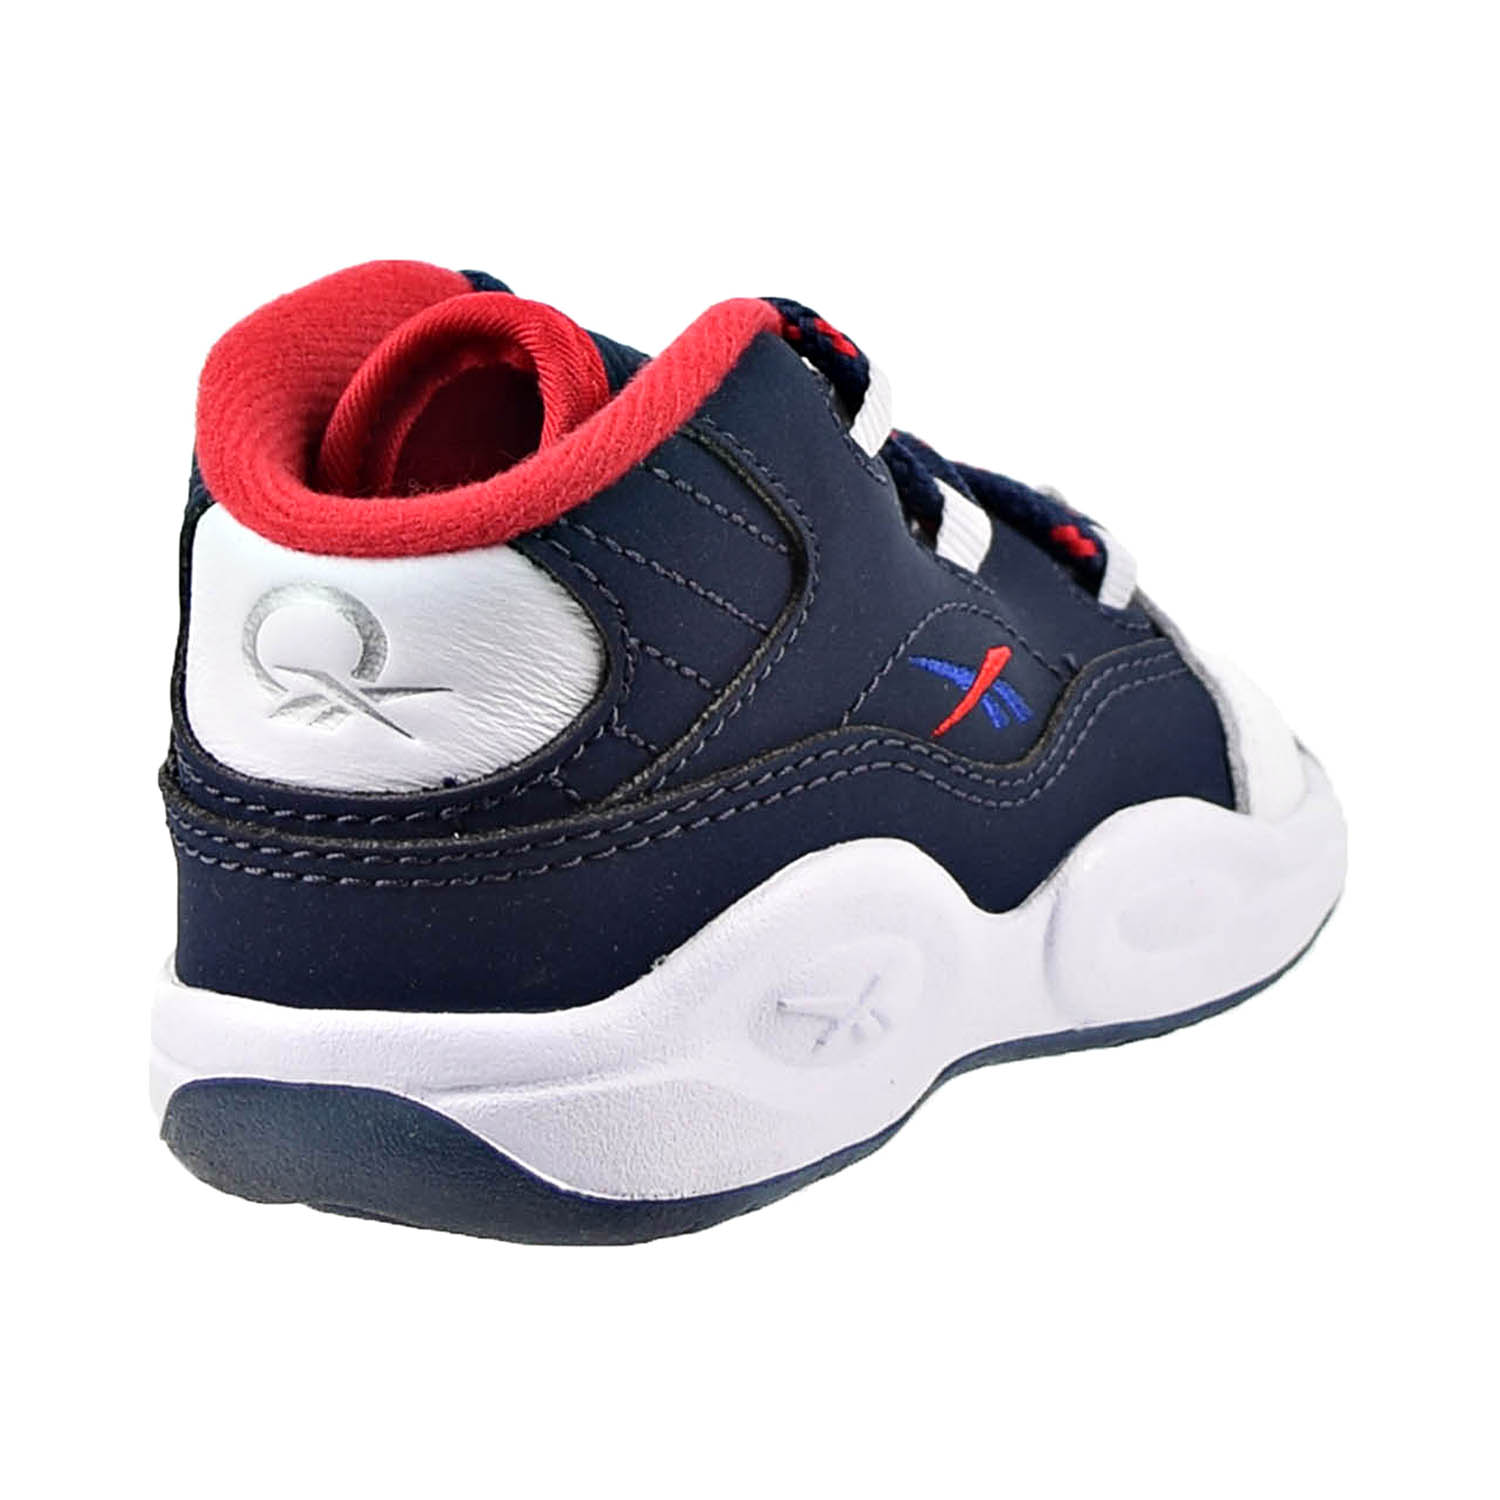 Reebok Question Mid Toddler's Shoes White-Navy-Red gx0389